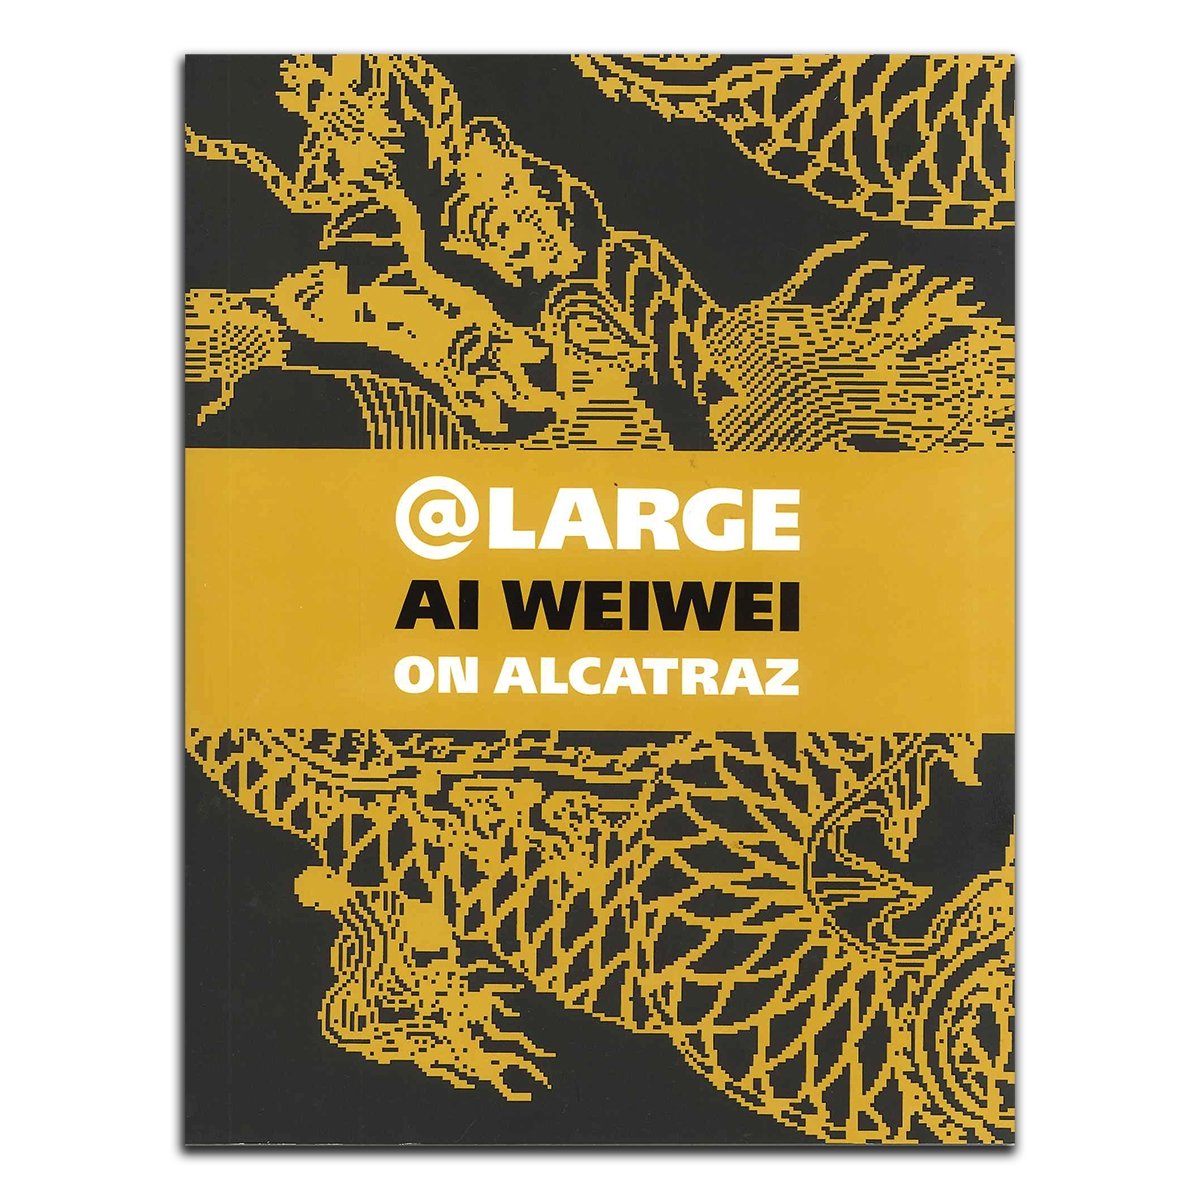 At Large: Ai WeiWei on Alcatraz exhibition catalog book, published by the Golden Gate National Parks Conservancy.